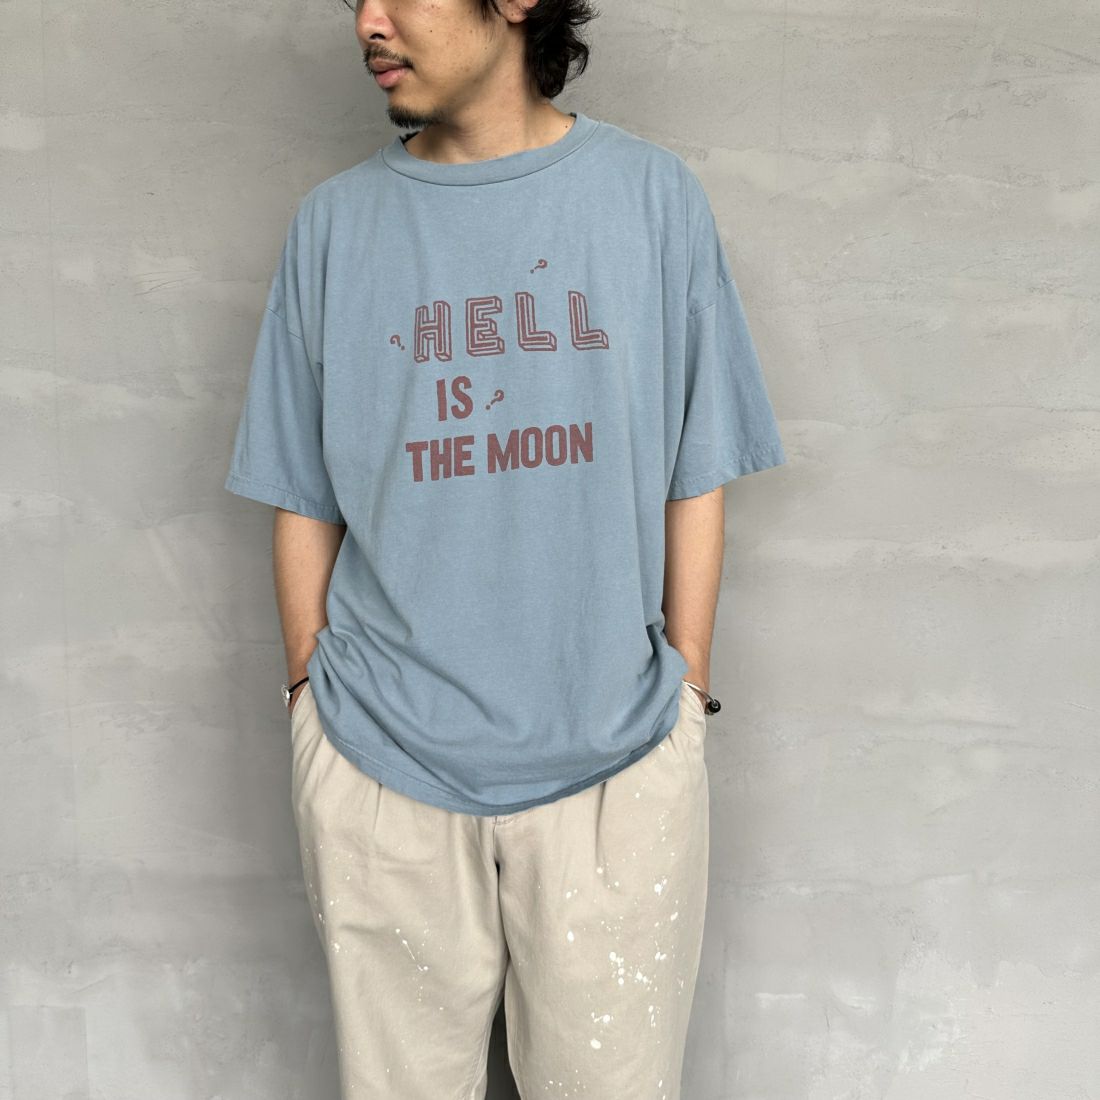 REMI RELIEF [レミレリーフ] 別注 ビッグプリントTシャツ HELL IS THEMOON [RN26349328-JF] SAX &&モデル身長：173cm 着用サイズ：M&&